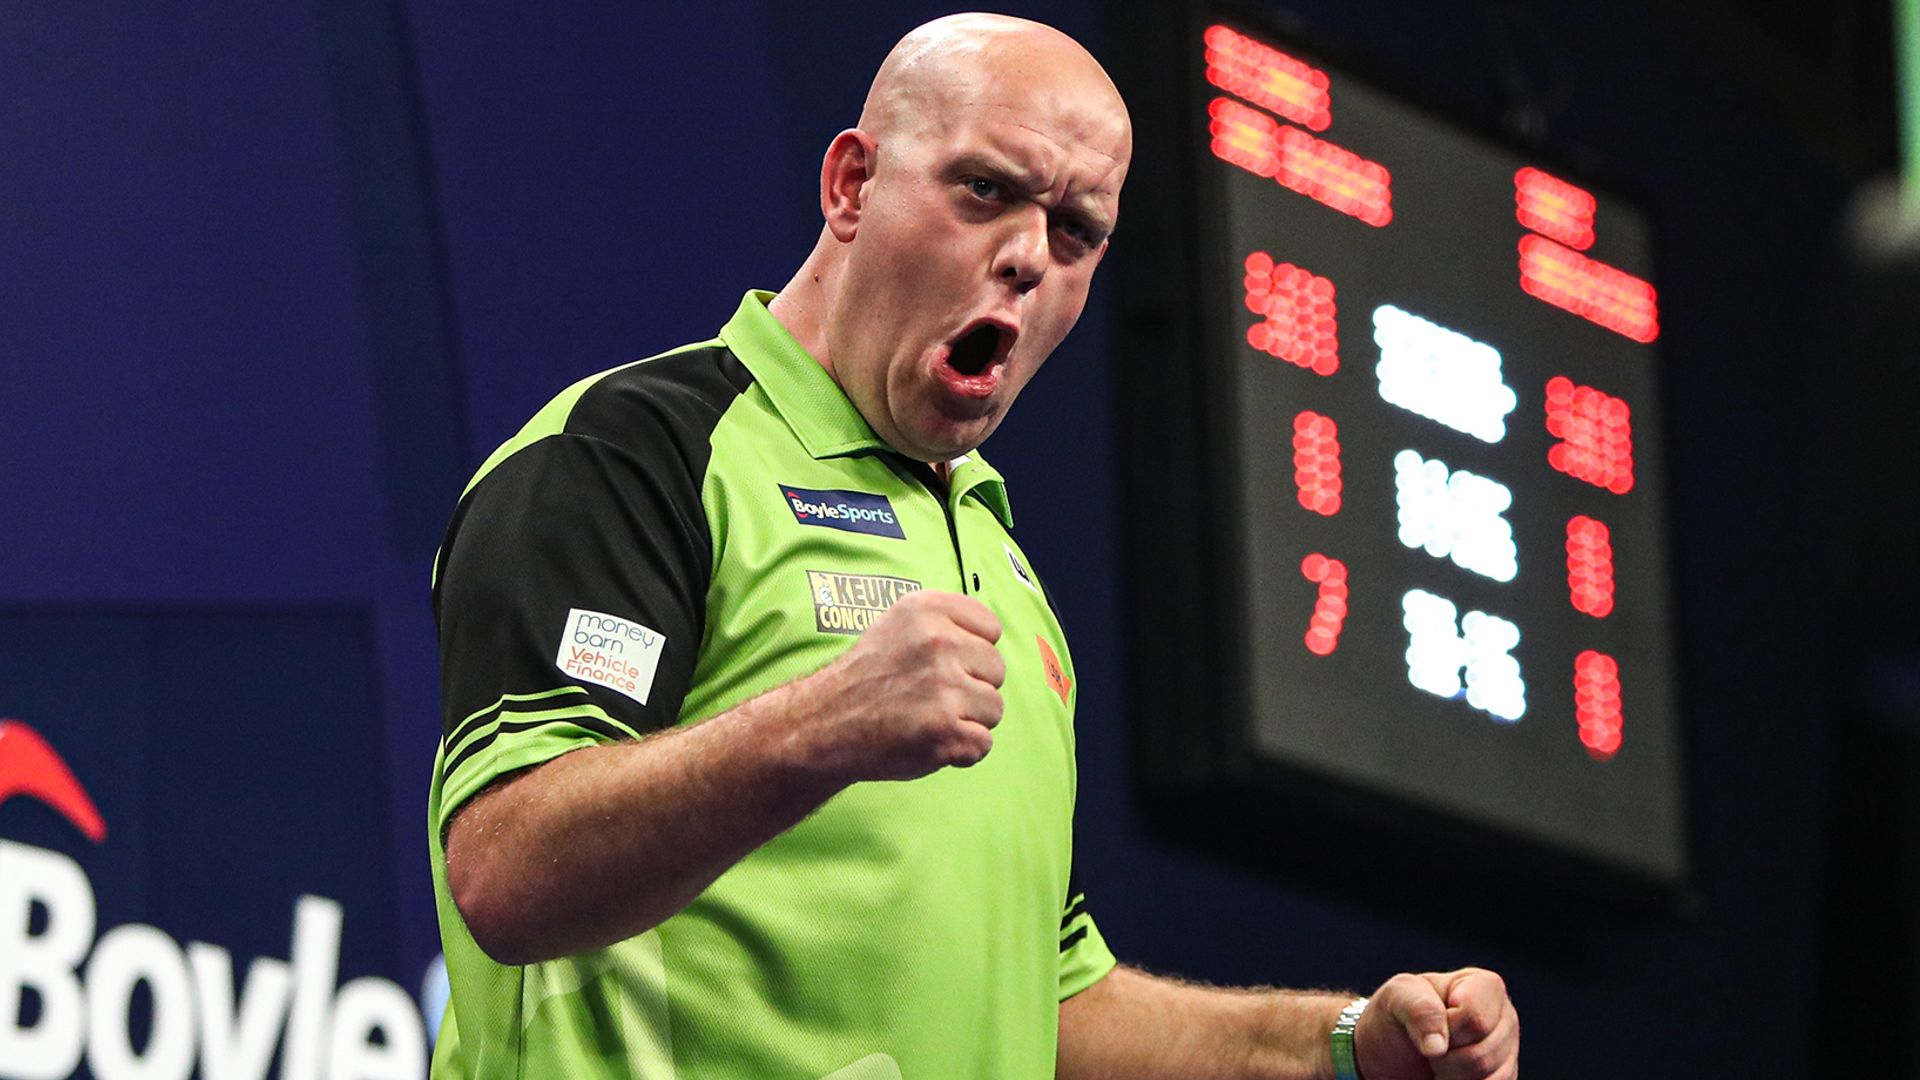 MVG, Wright, Clayton & Lewis all progress on opening night of the World Grand Prix